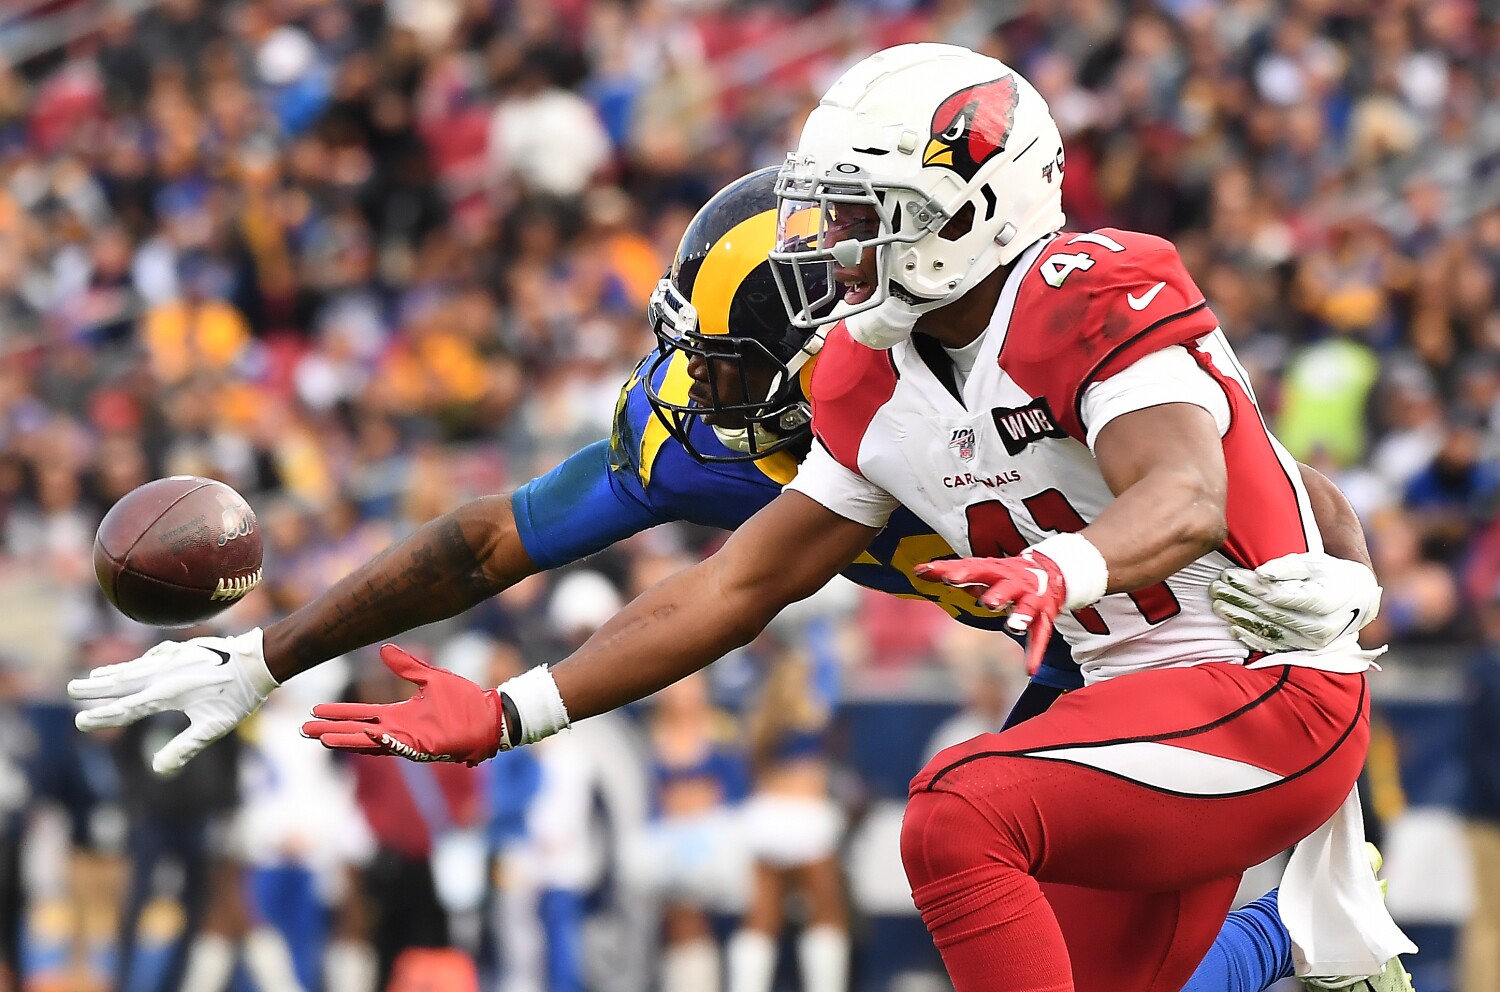 Rams end season and Coliseum tenure with a victory over the Cardinals